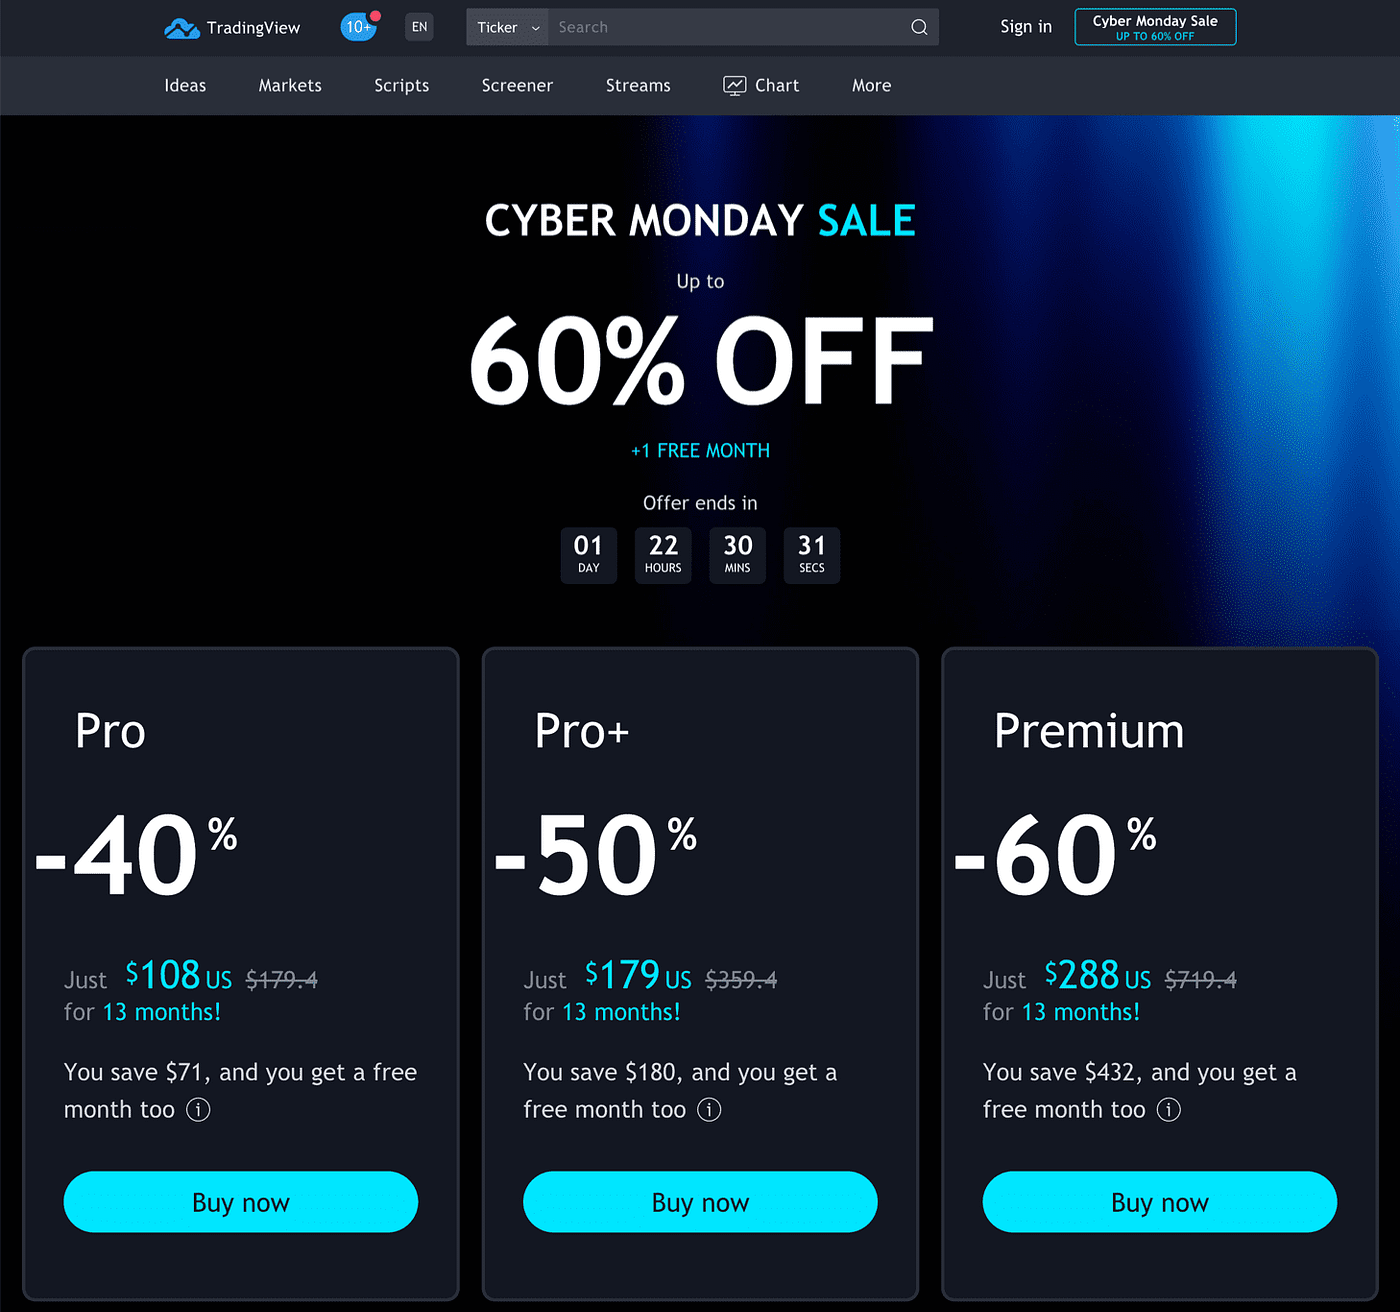 Black Friday sale (up to 60% off) : r/TradingView